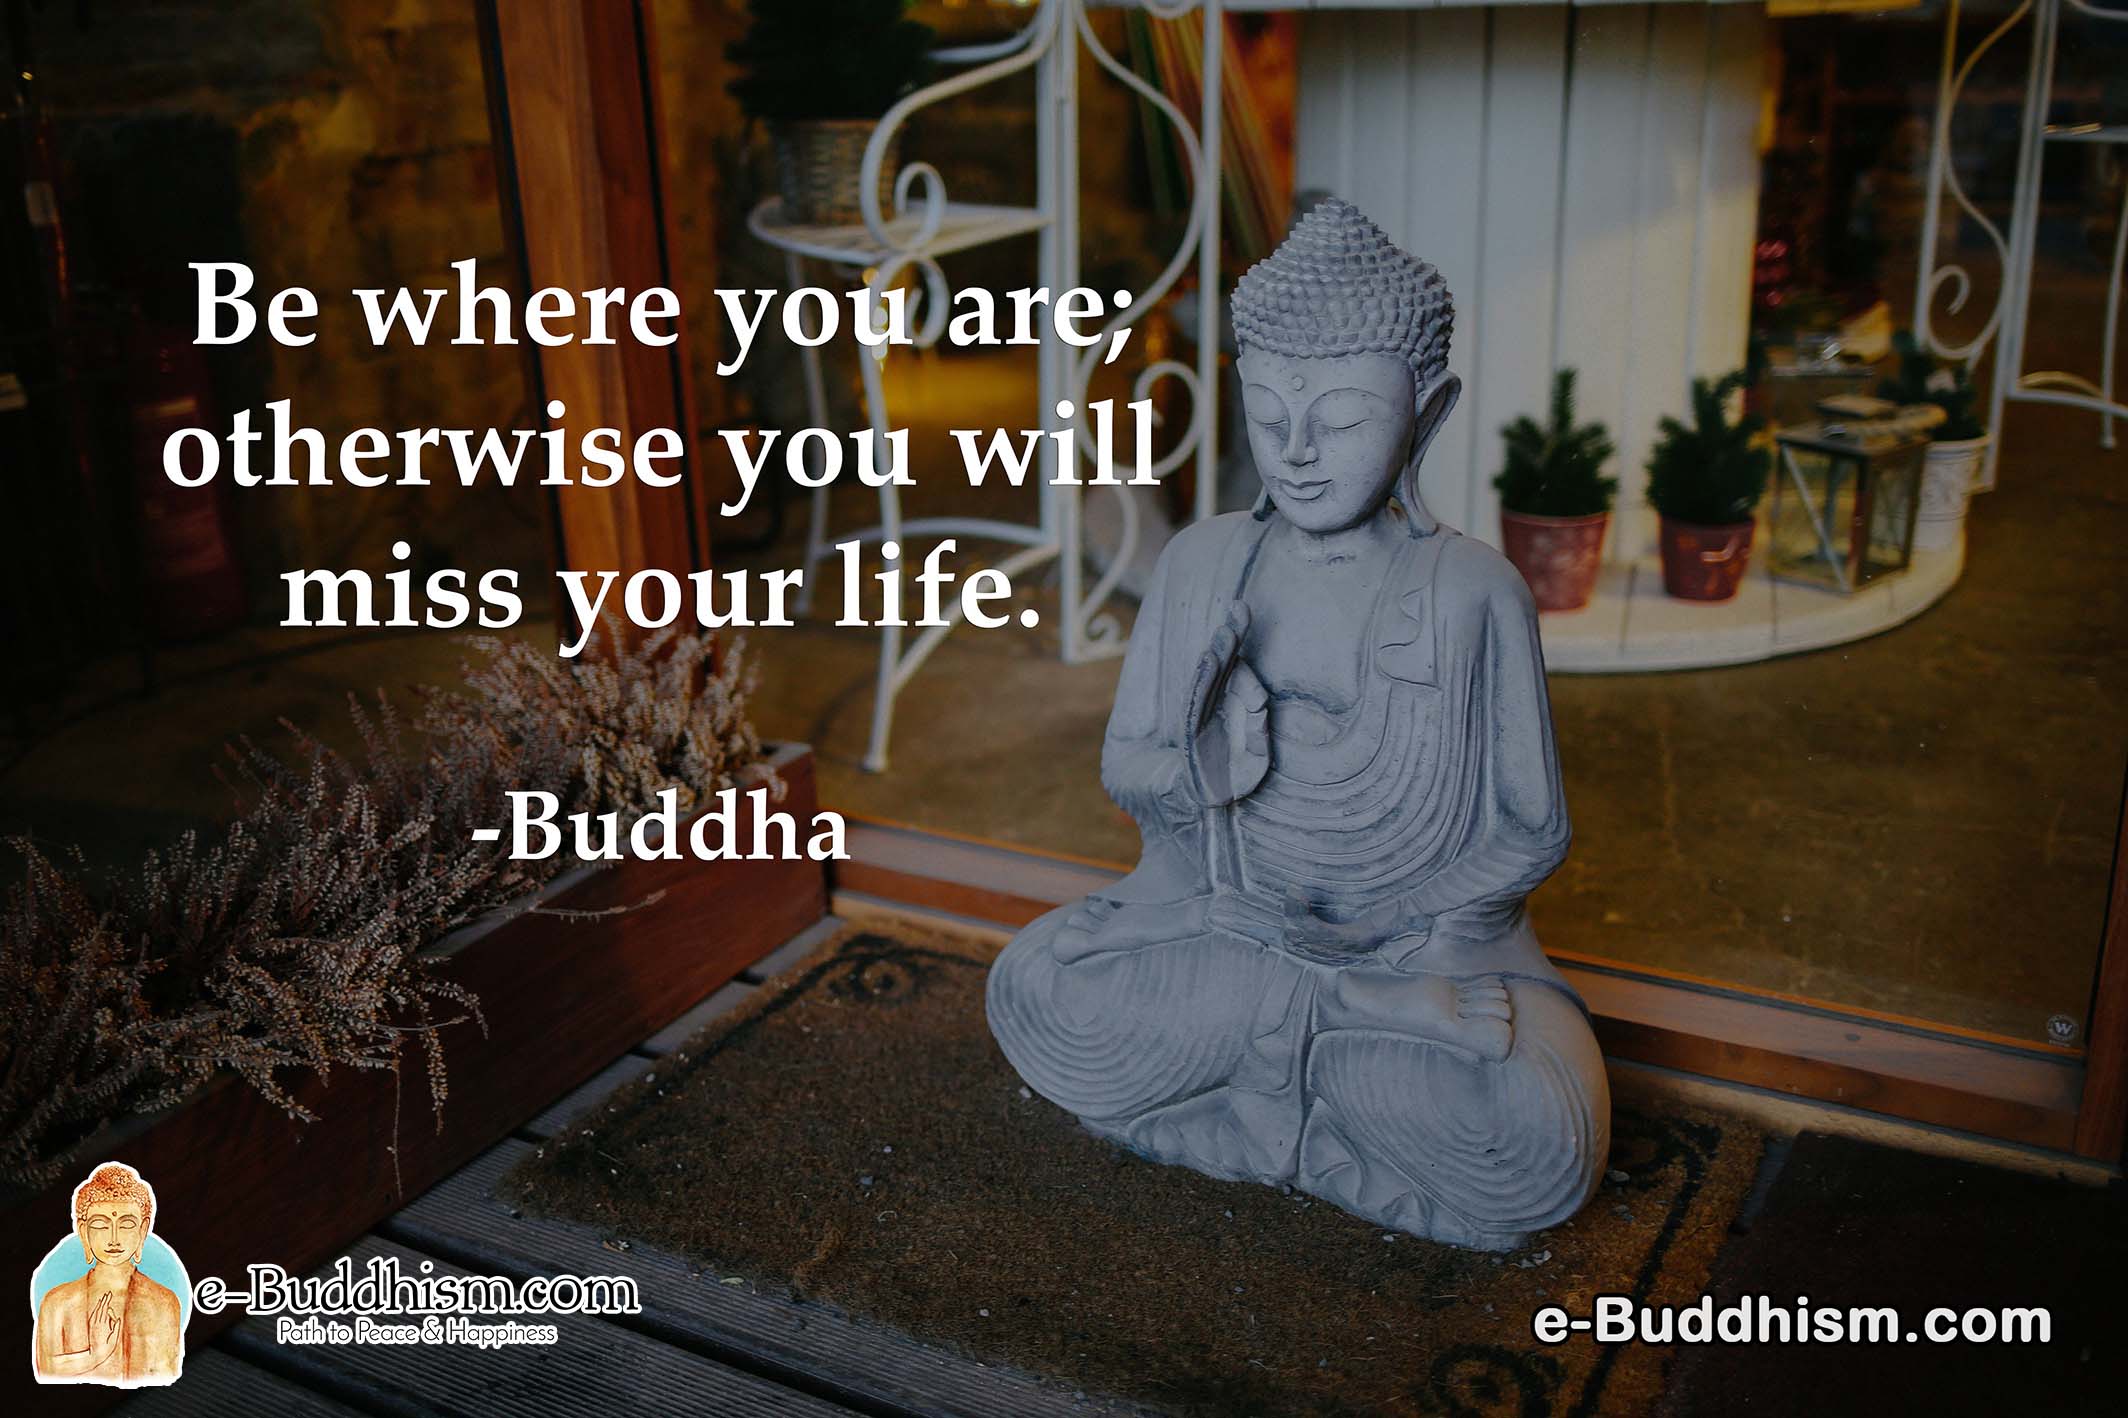 Be where you are; otherwise, you will miss your life. -Buddha